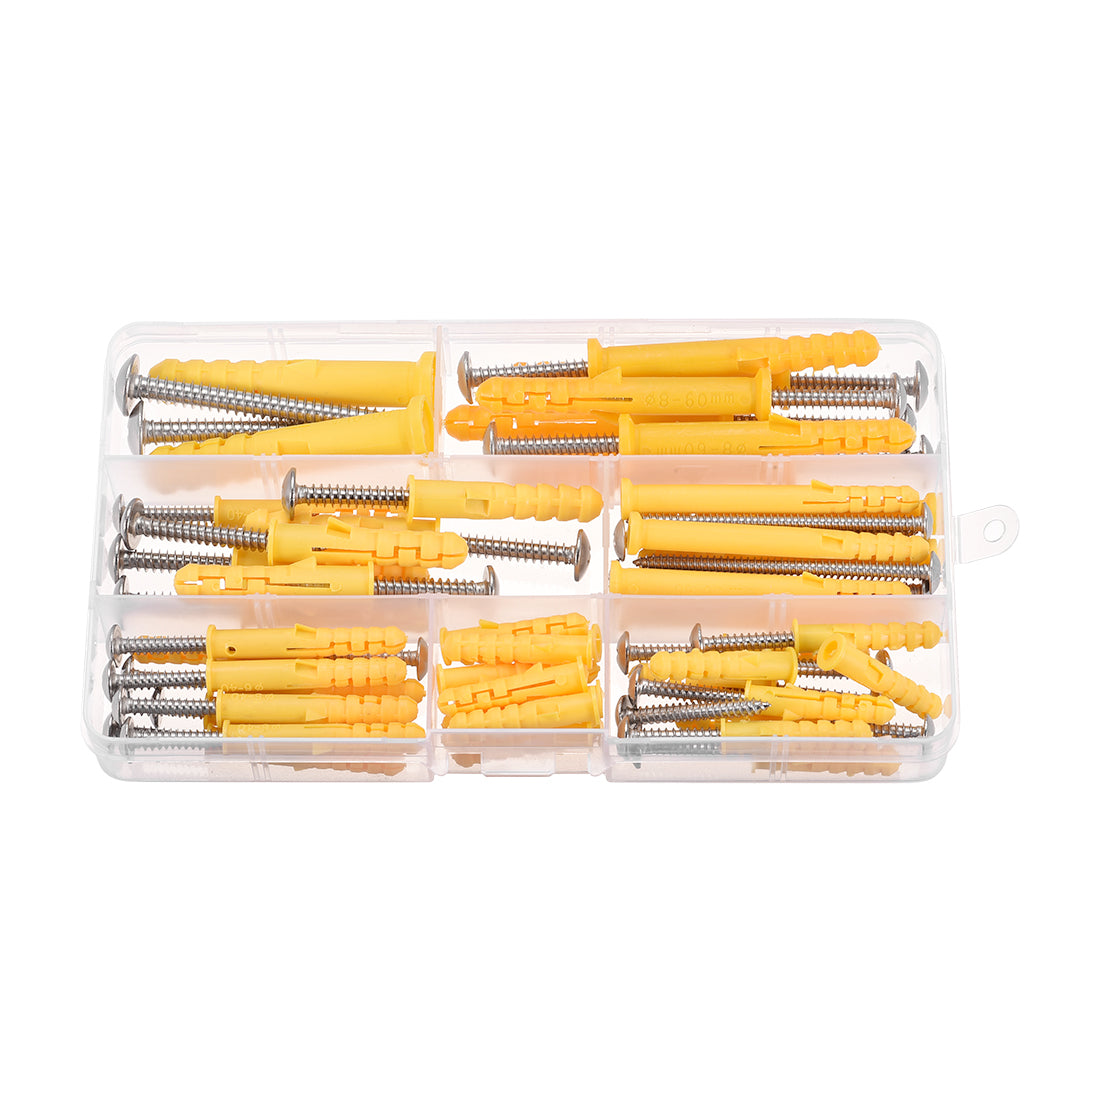 uxcell Uxcell Plastic Expansion Tube Screw Assortment Kit for Drywall Yellow 1 Set